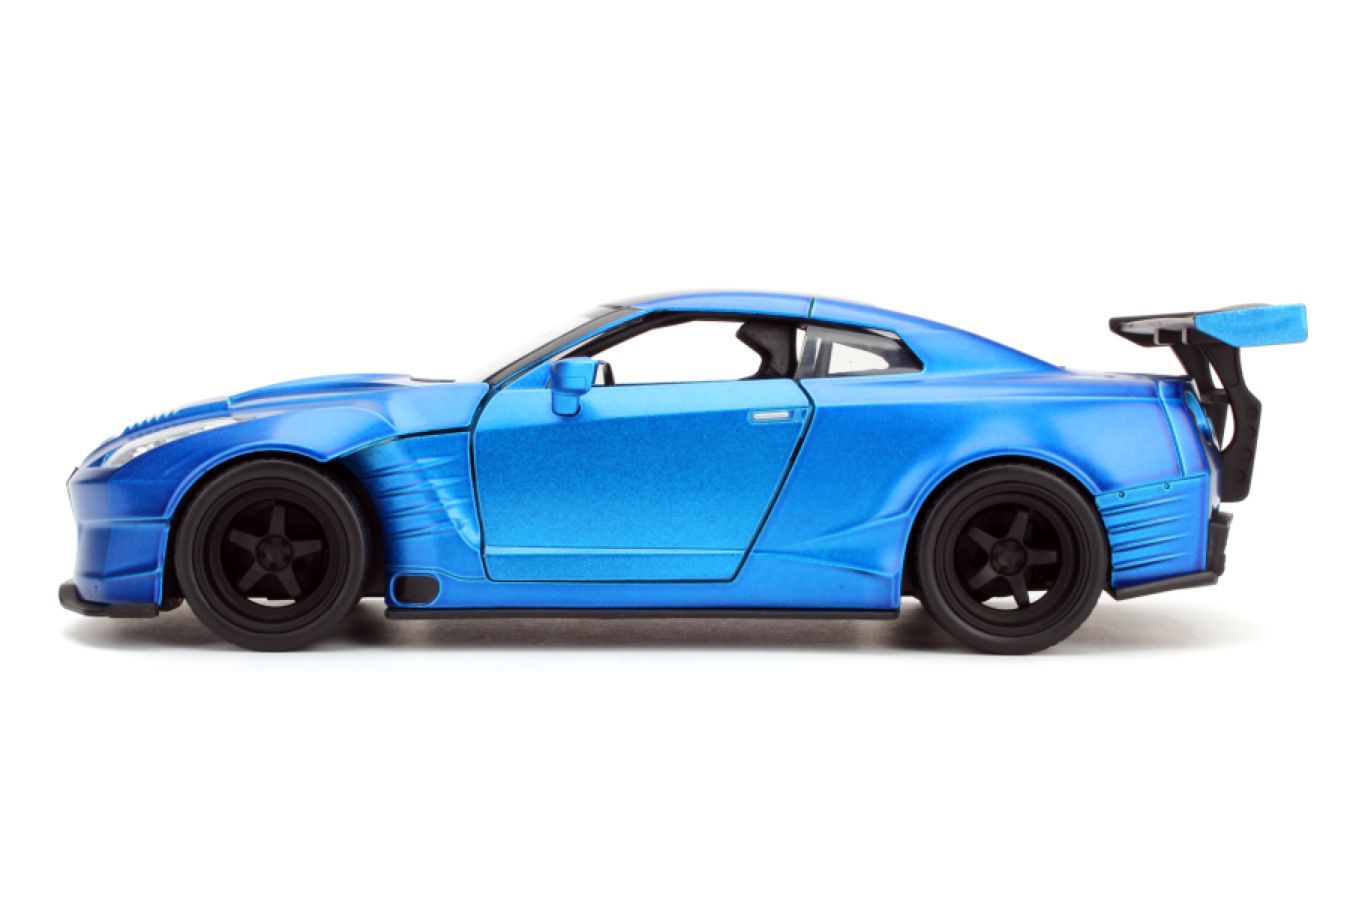 Fast and Furious 8 - '09 Nissan GT-R Ben Sopra 1:24 Scale Hollywood Ride